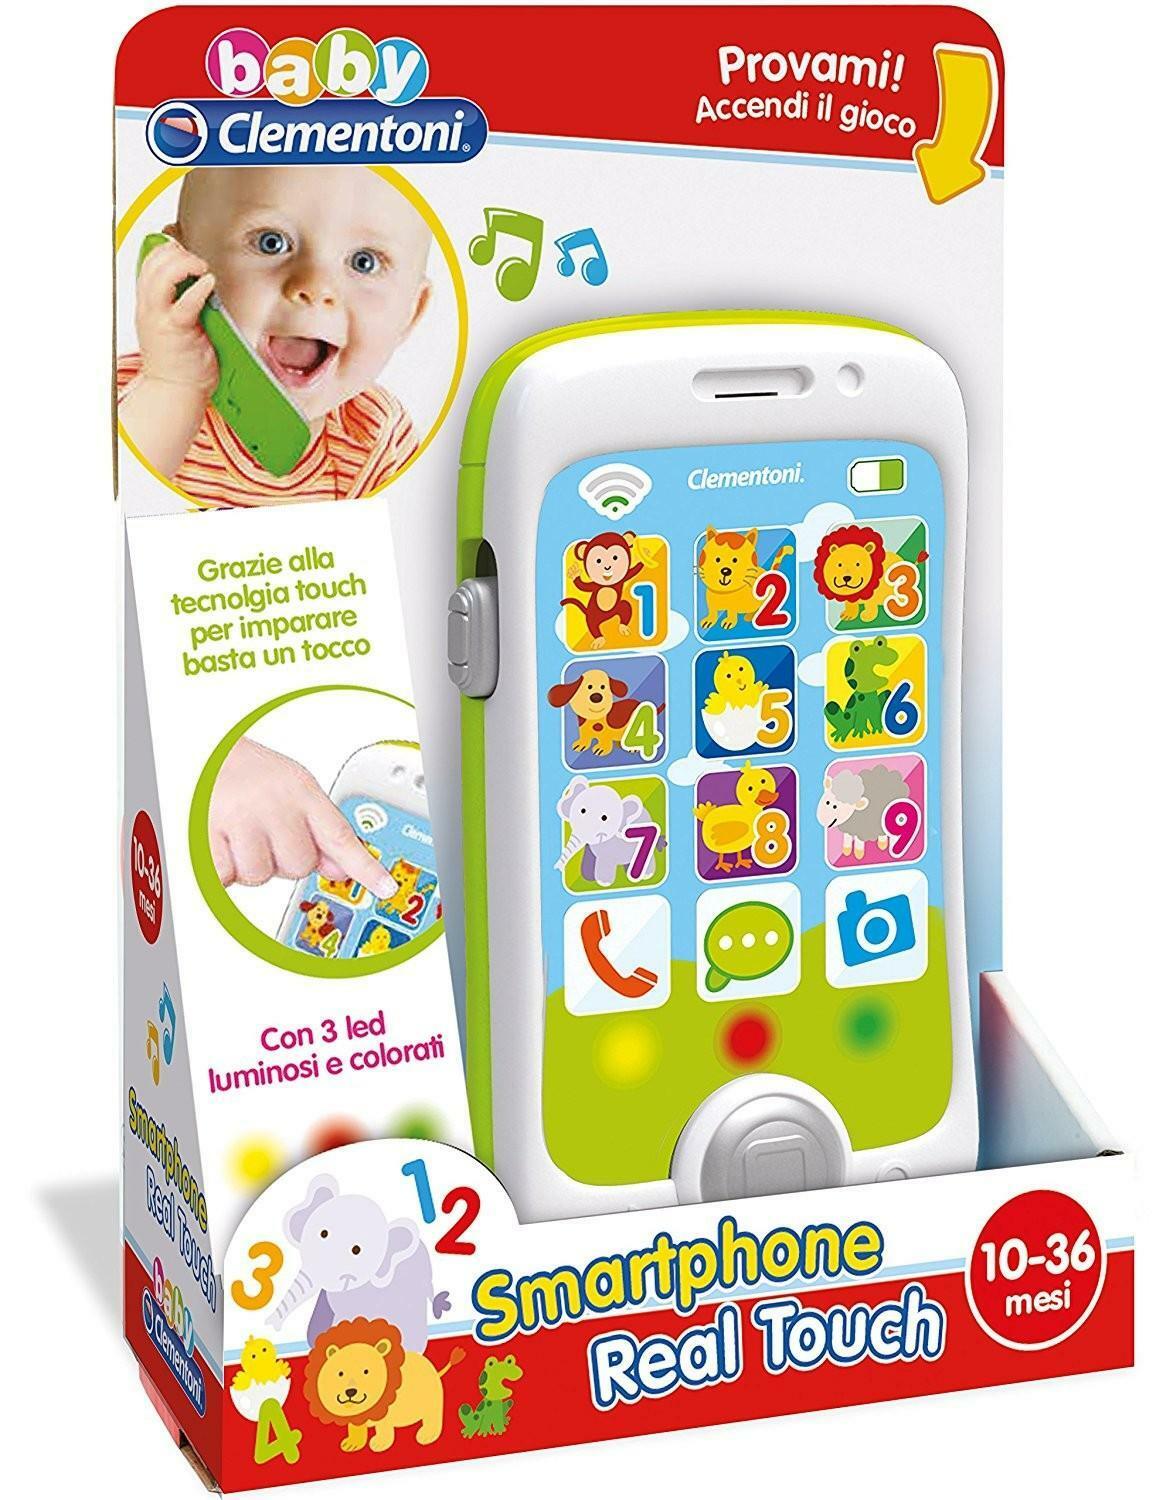 clementoni smartphone touch & play